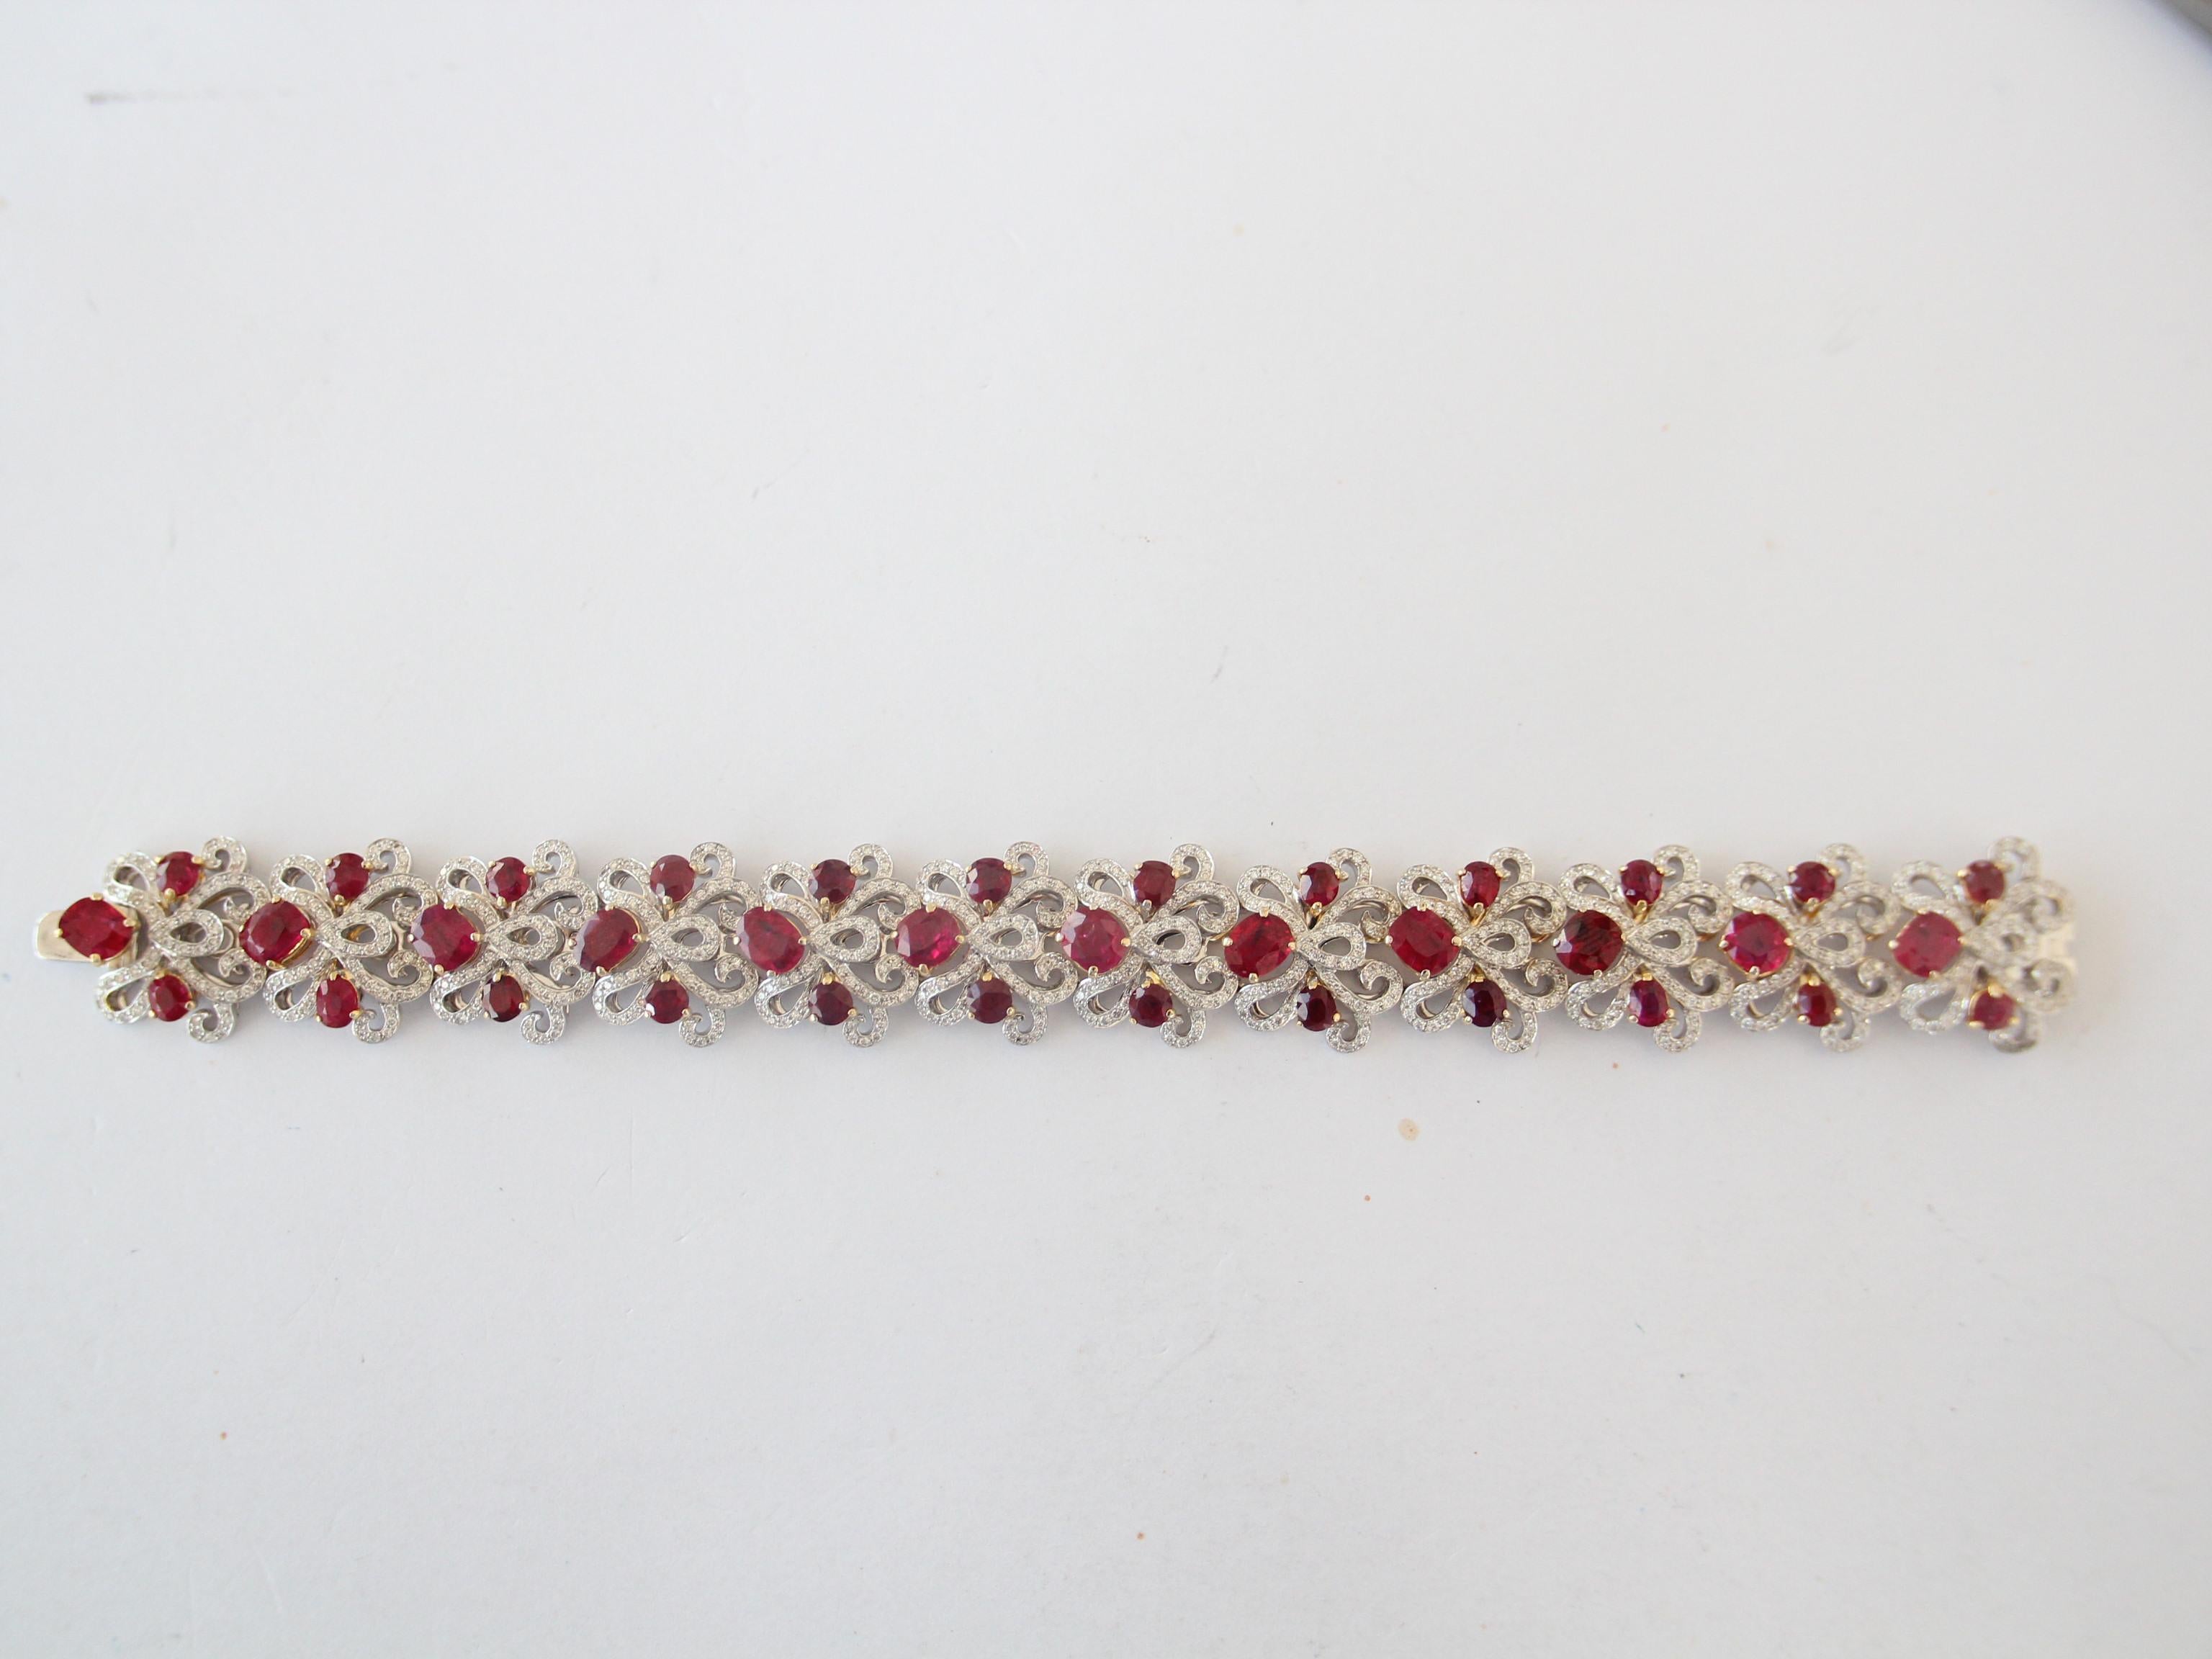 A brand new hand made bracelet by Rewa made with natural Burmese rubies and diamonds, in 18 Karat white gold. One ruby of weight 0.99 carat is certified GRS Pigeon Blood Burmese No heat, the rest of the rubies have not been tested. The total ruby